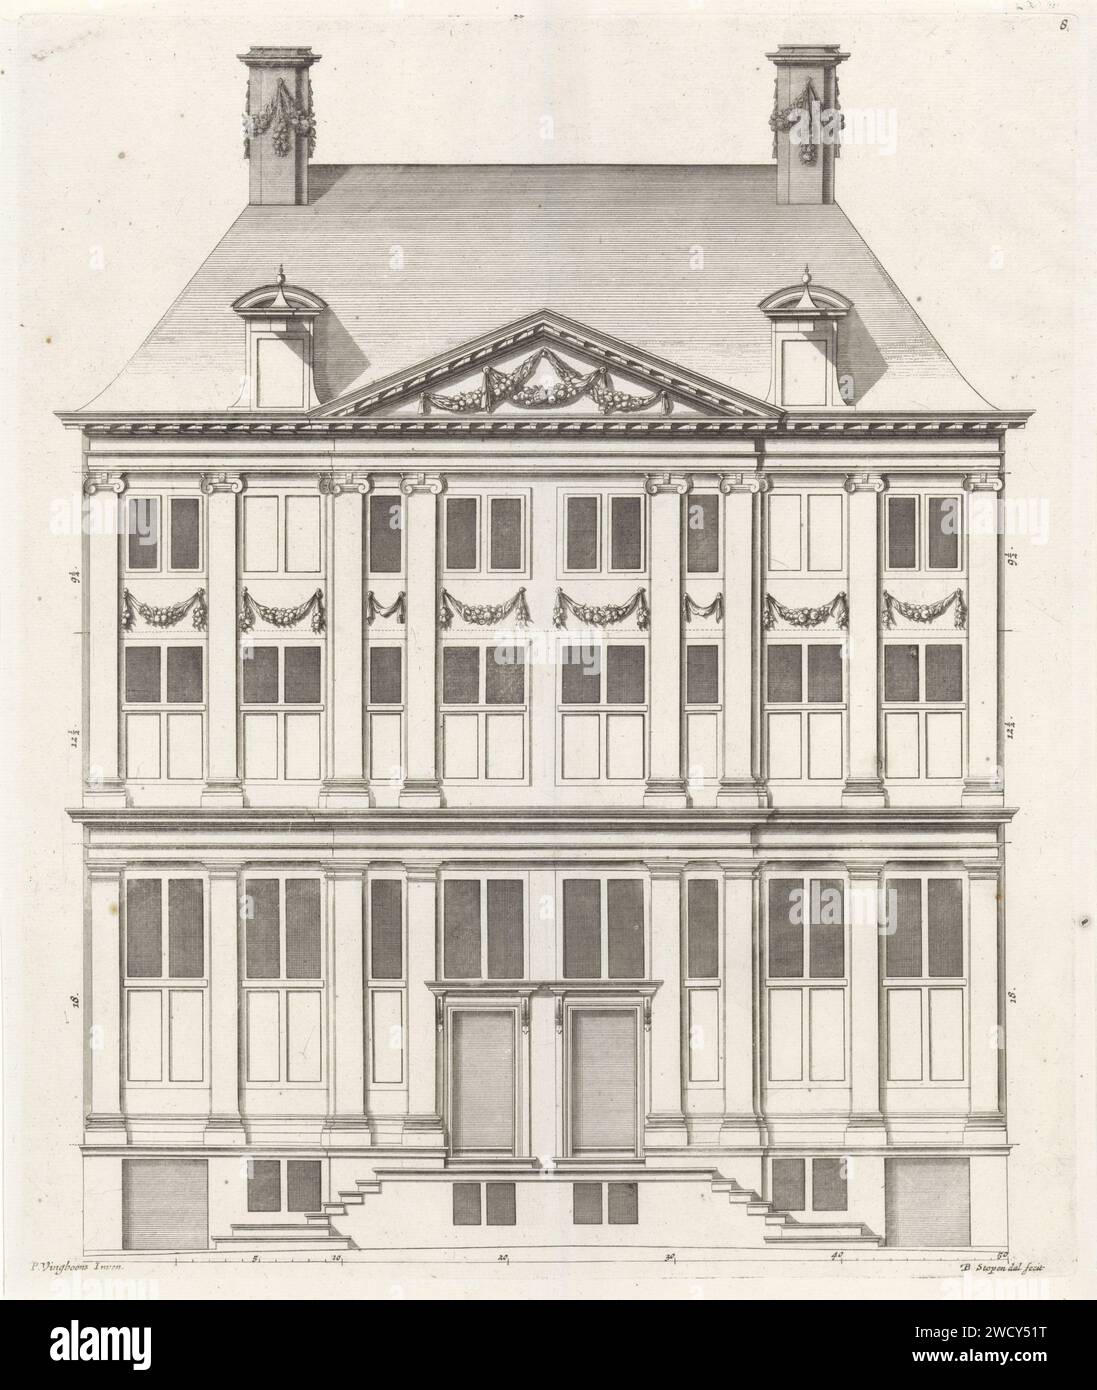 Facade of a double house on the Oudezijds Voorburgwal in Amsterdam, Bastiaen Stopendael, after Philips Vinckboons (II), 1674 print Facade of the Double Woonhuis on the Oudezijds Voorburgwal 205-207 in Amsterdam. The house was designed by Philips Vingboons for Jan and Hendrik Schuyt in 1650. Amsterdam paper etching / engraving exterior  architectural design or model Oudezijds Voorburgwal Stock Photo